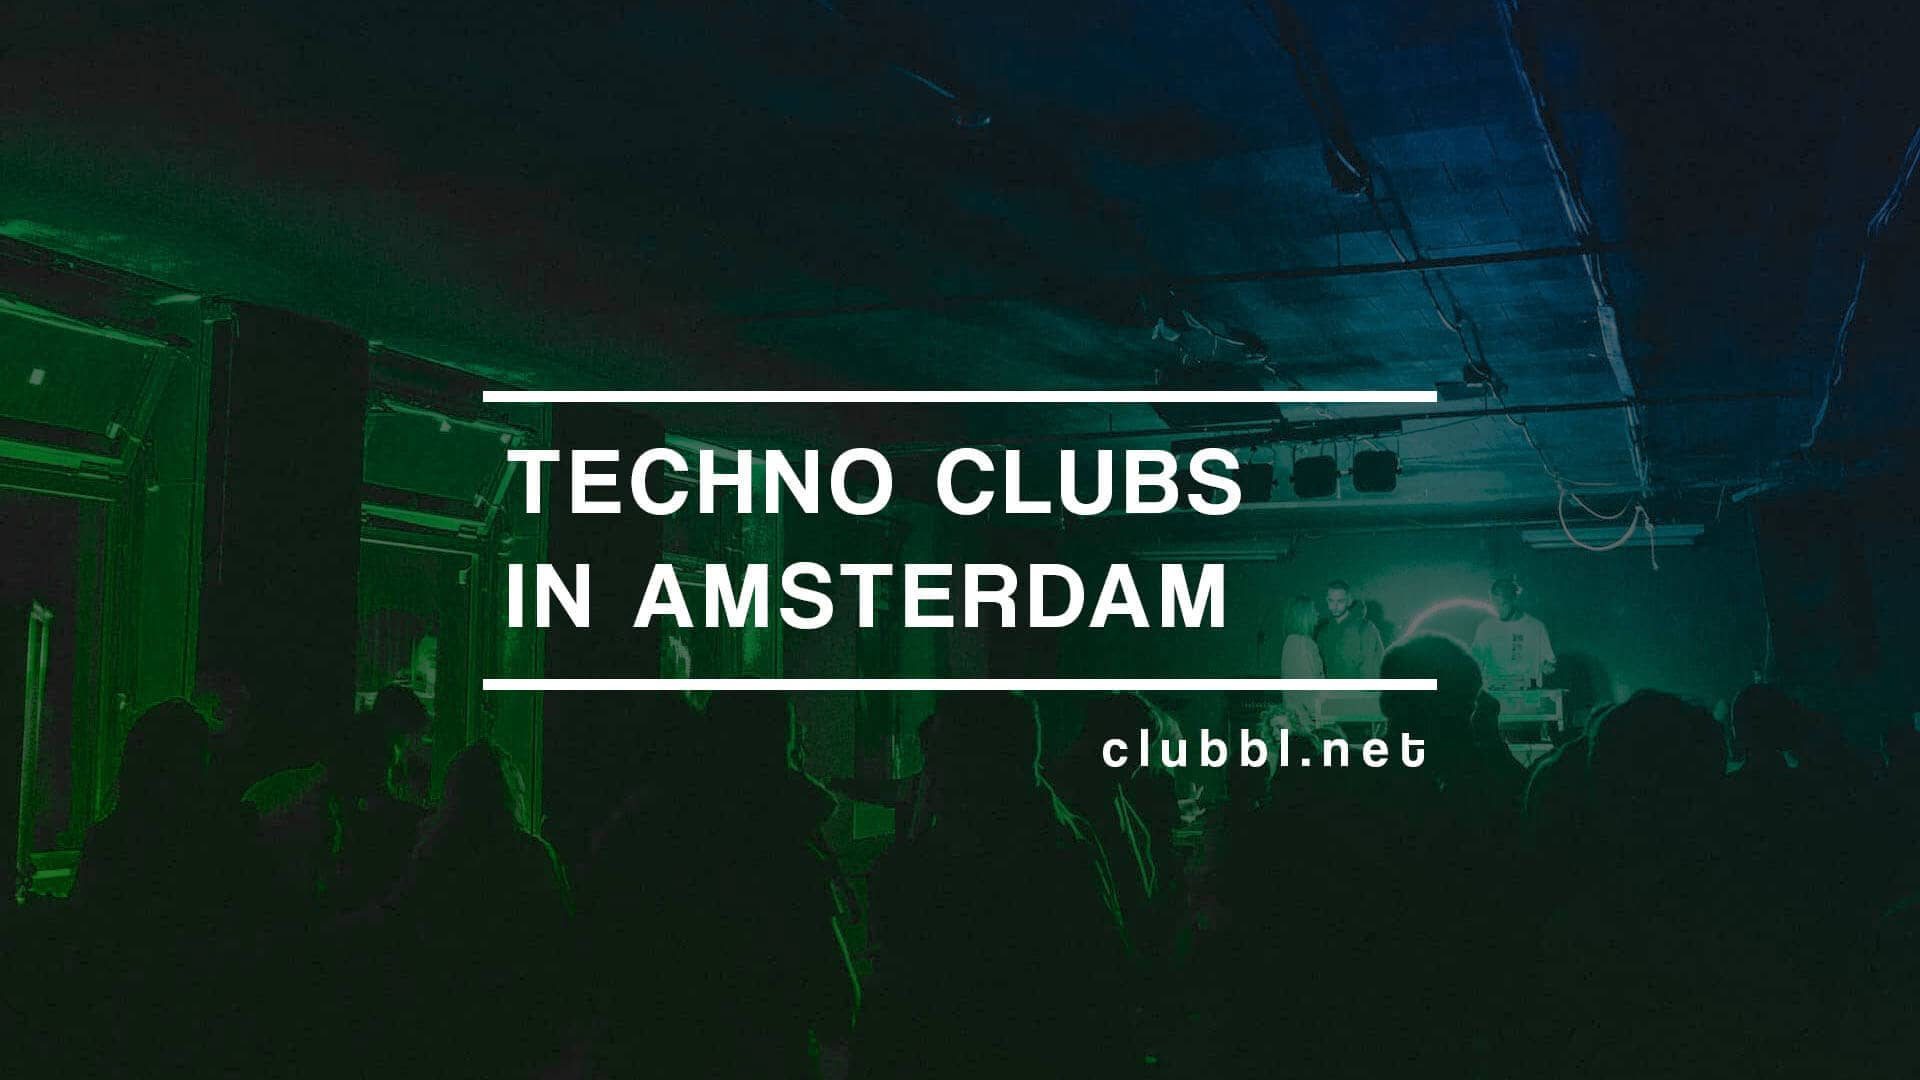 Techno clubs in Amsterdam discover the differente options to enjoy techno in the city